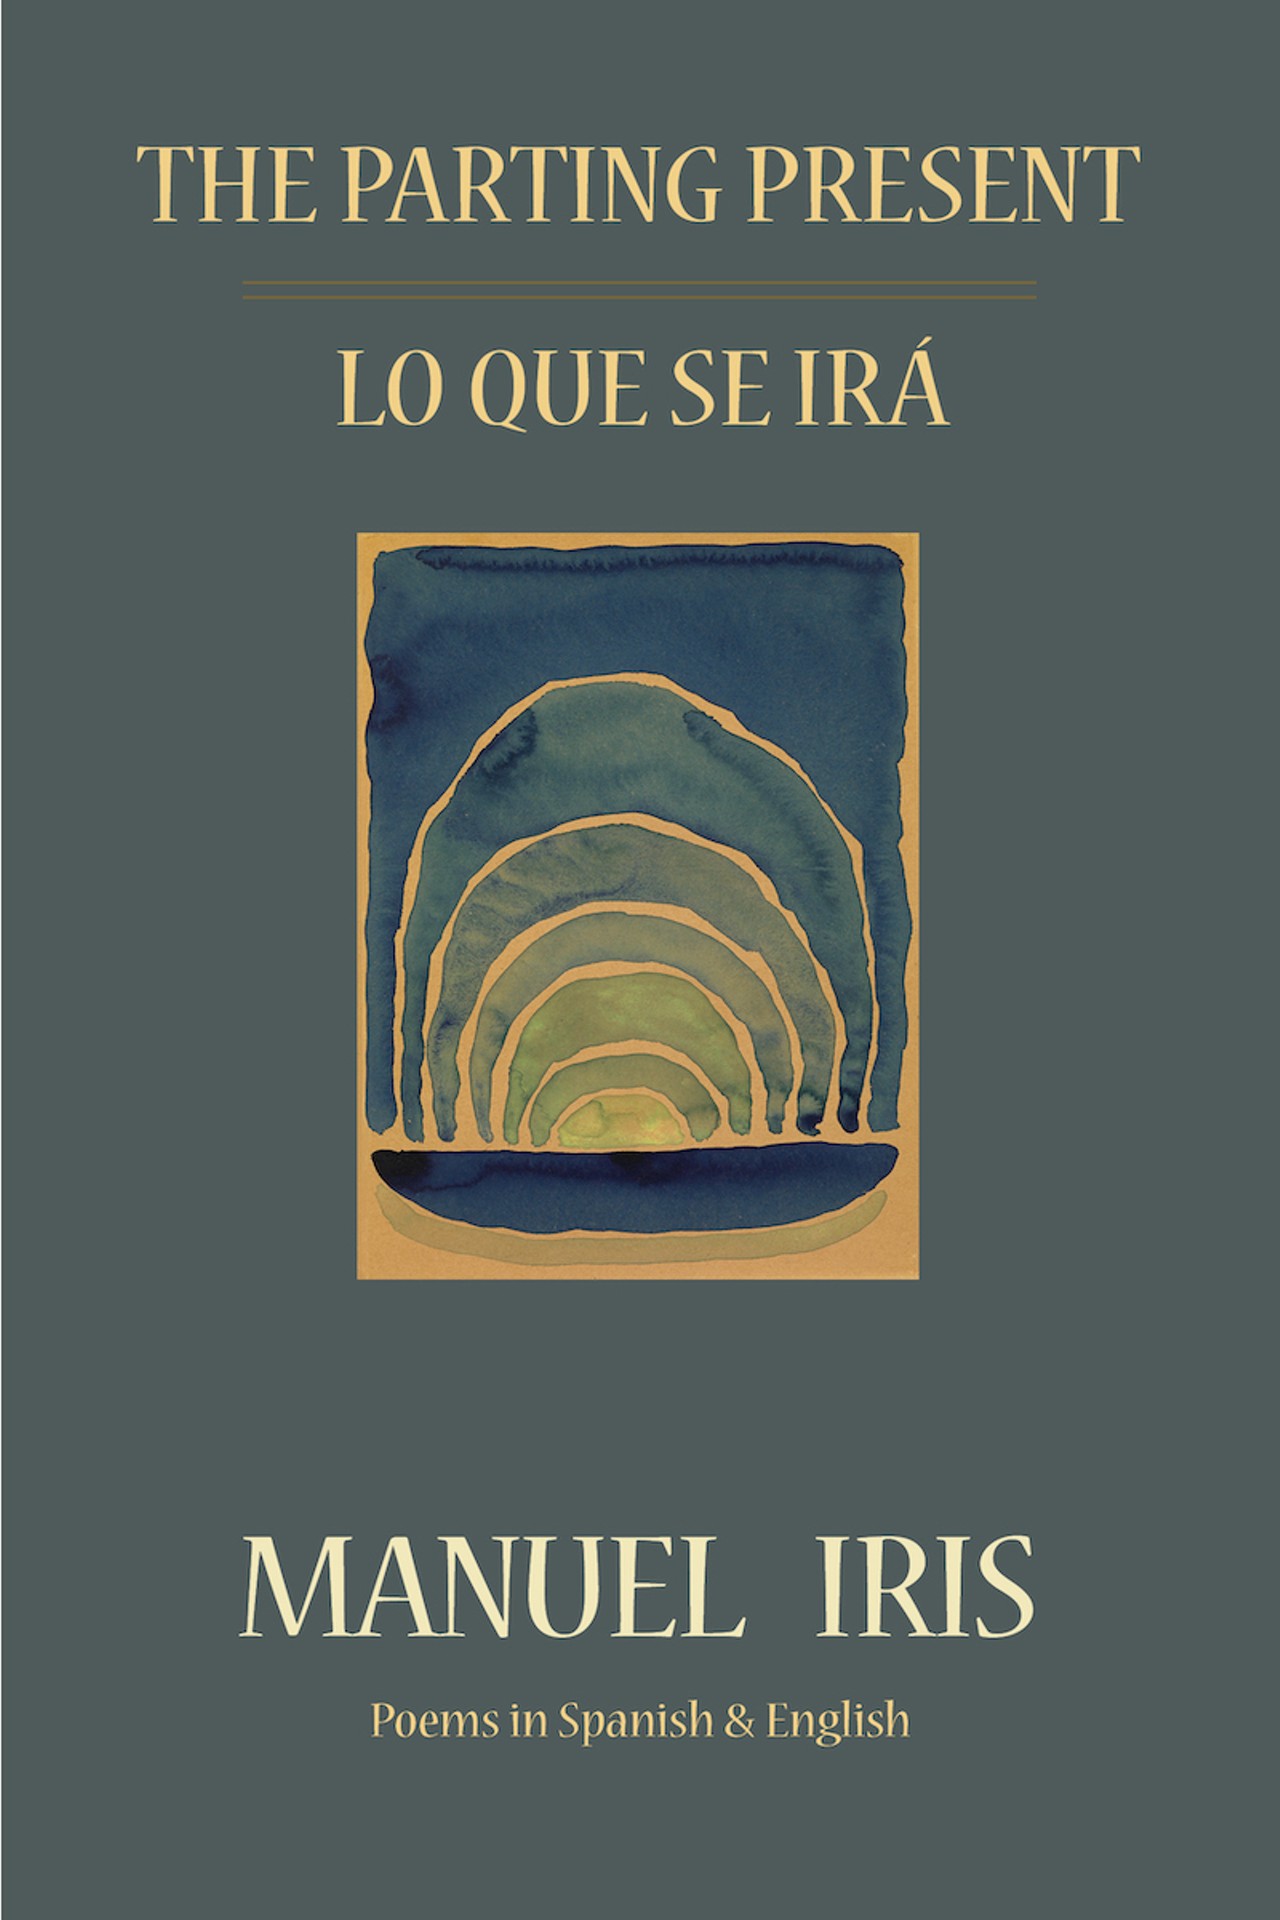 The Parting Present by Manuel Iris
Lo Que Se Irá, or The Parting Present, is a bilingual collection of poetry from Manuel Iris, a Mexican poet now residing in Cincinnati. The collection was the Readers’ Choice selection for the 2022 Ohioana Book Awards, the second oldest state literary prize in the nation. A recognition from Ohioana places Iris among some of the state’s most renowned writers, including the late, great Toni Morrison. Iris served as the poet laureate emeritus of Cincinnati from 2018-2020 and is the Public Library of Cincinnati and Hamilton County’s writer-in-residence.